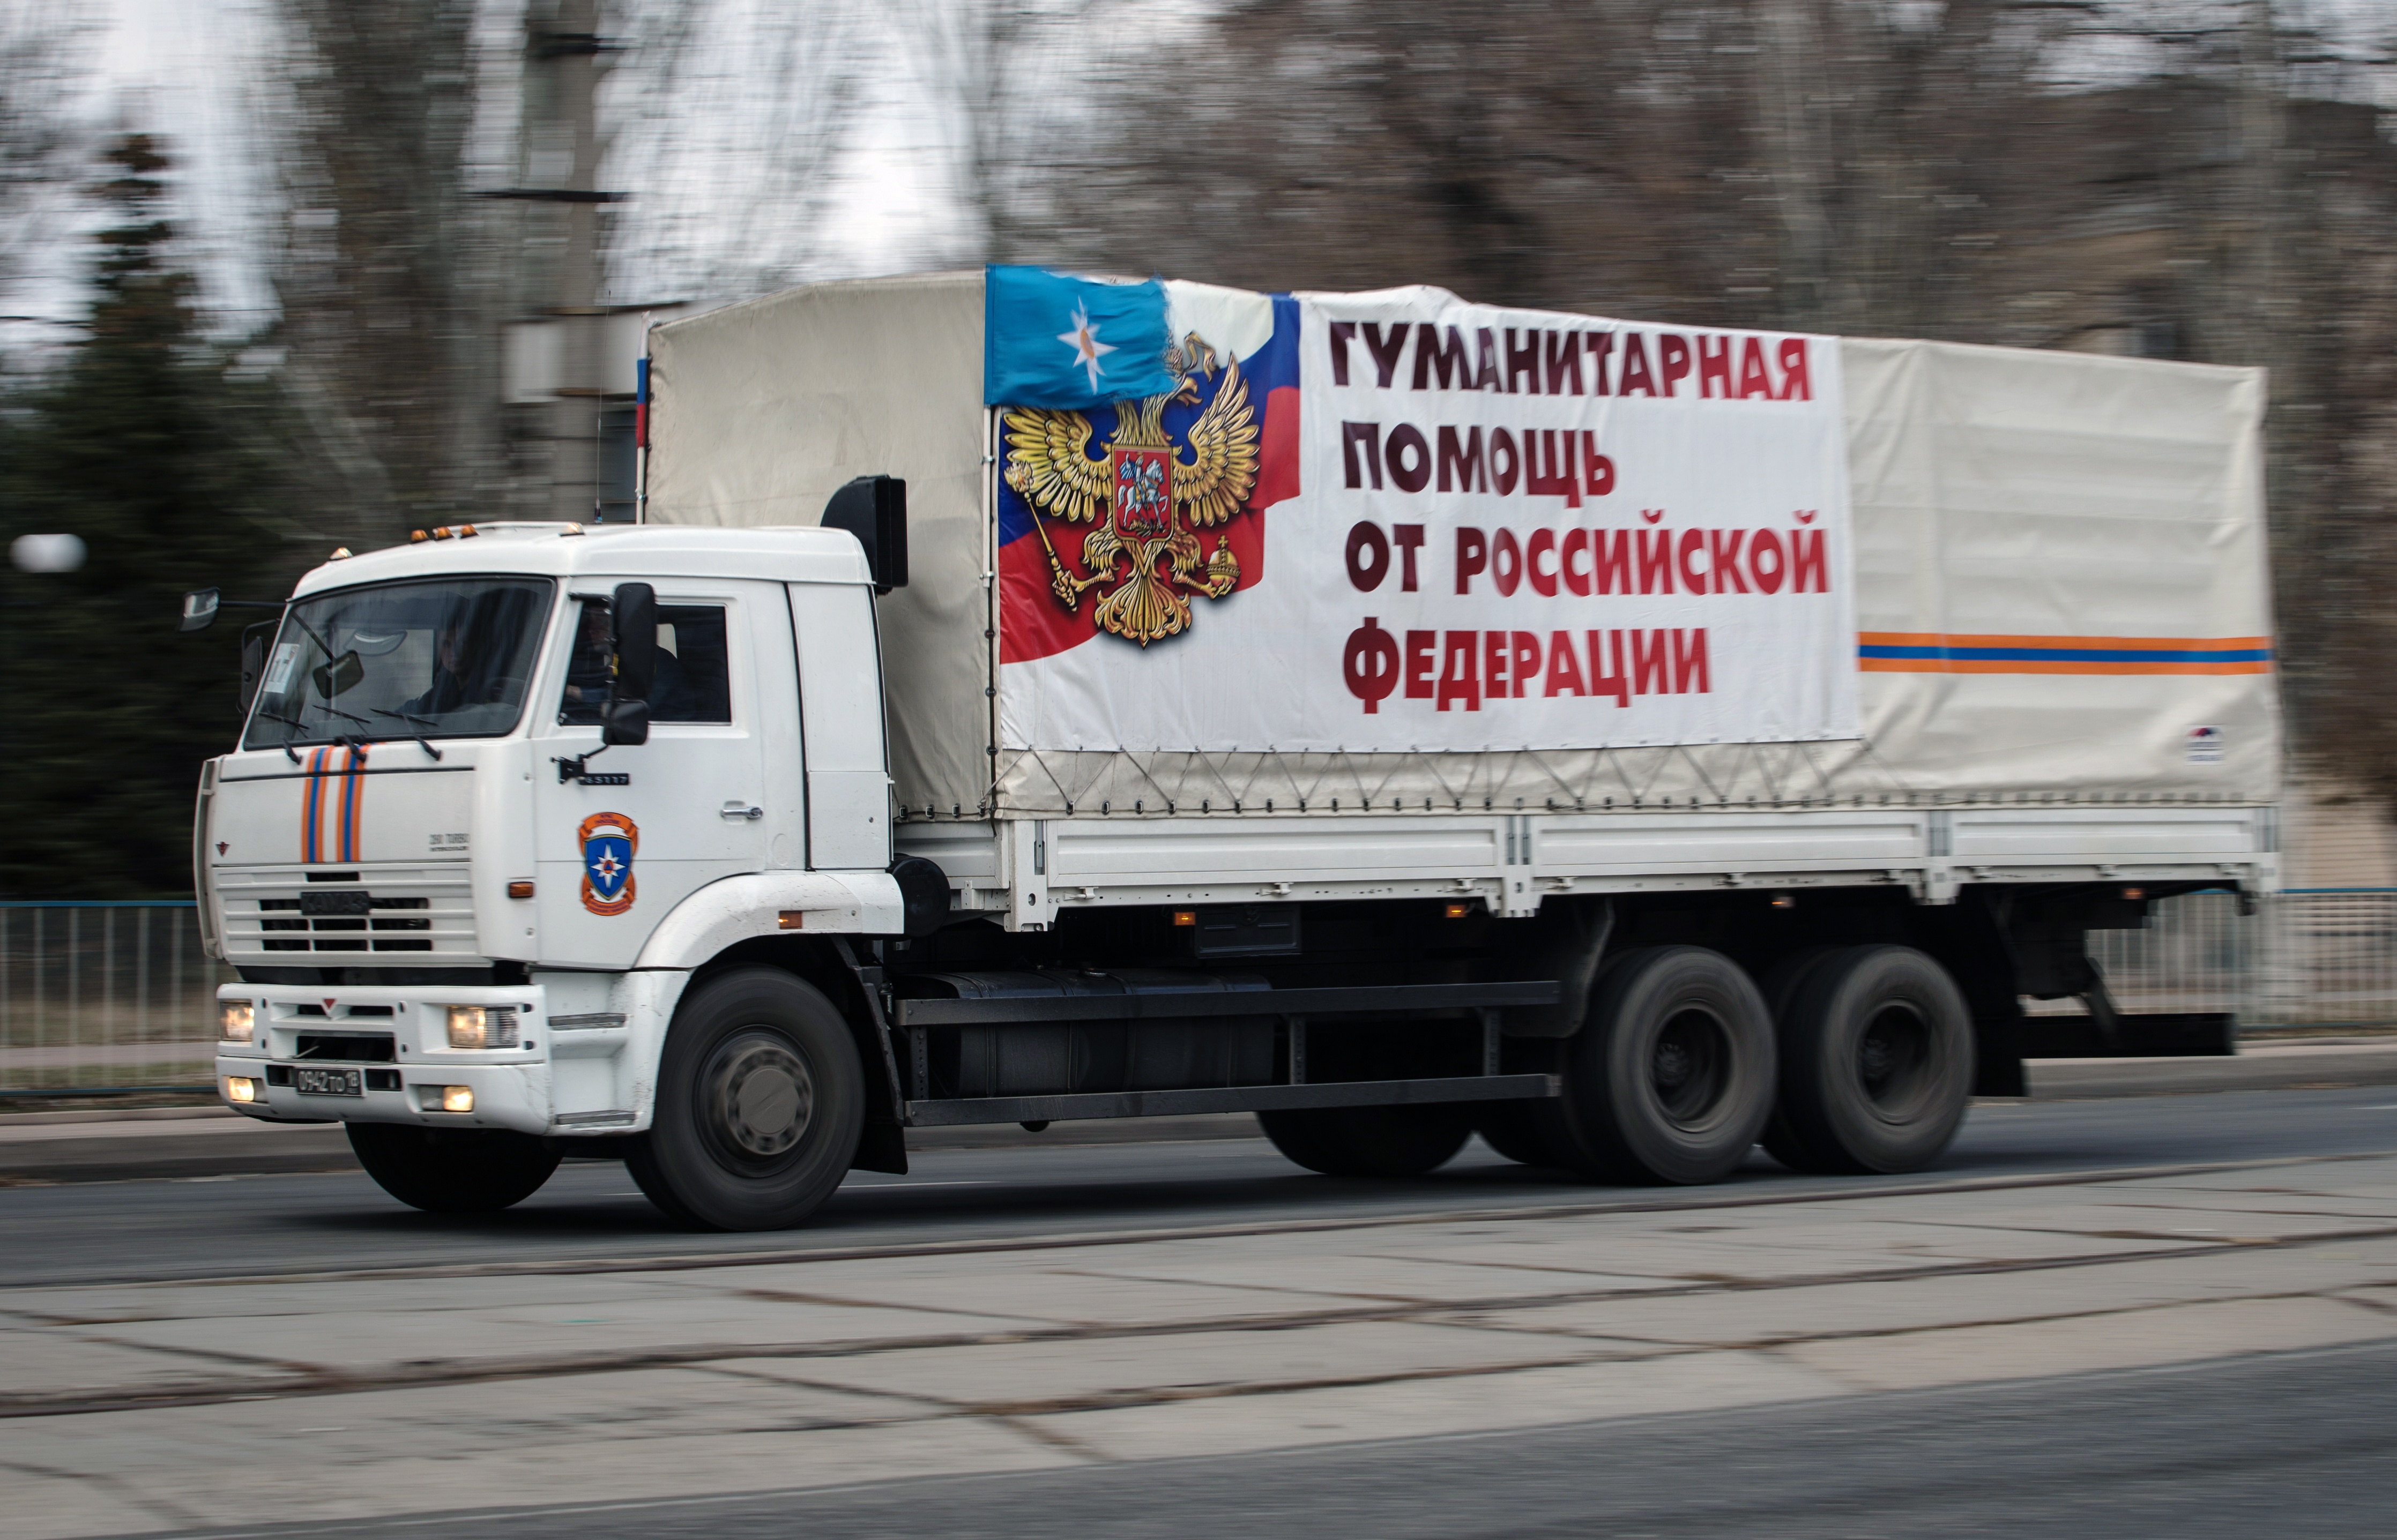 The 45th Humanitarian Aid Convoy Arrives In Donetsk People’s Republic From Mother Russia !